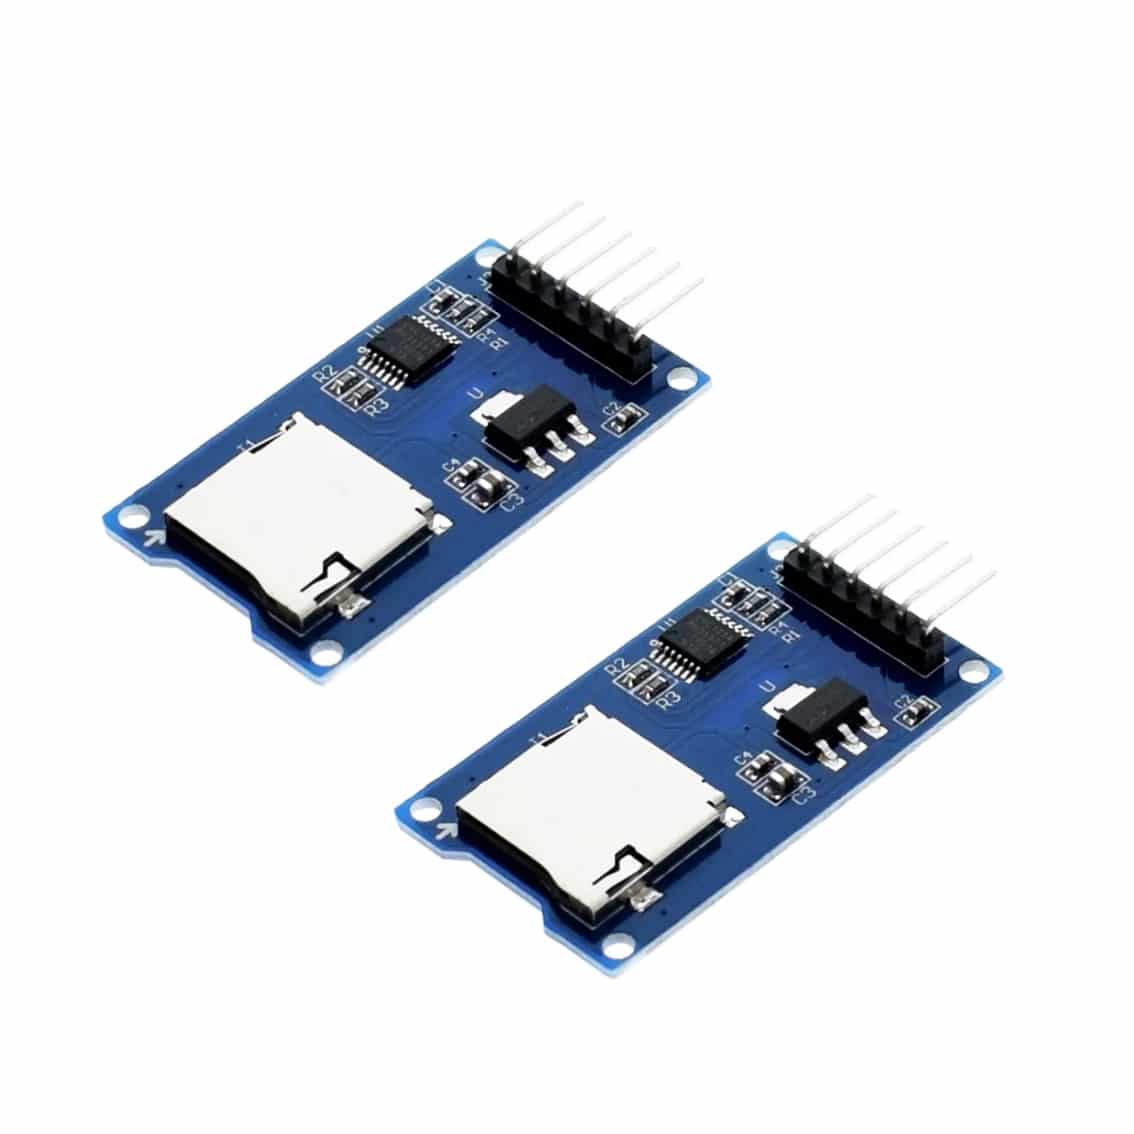 Micro SD Card Reader Module for Arduino - Pack of 2